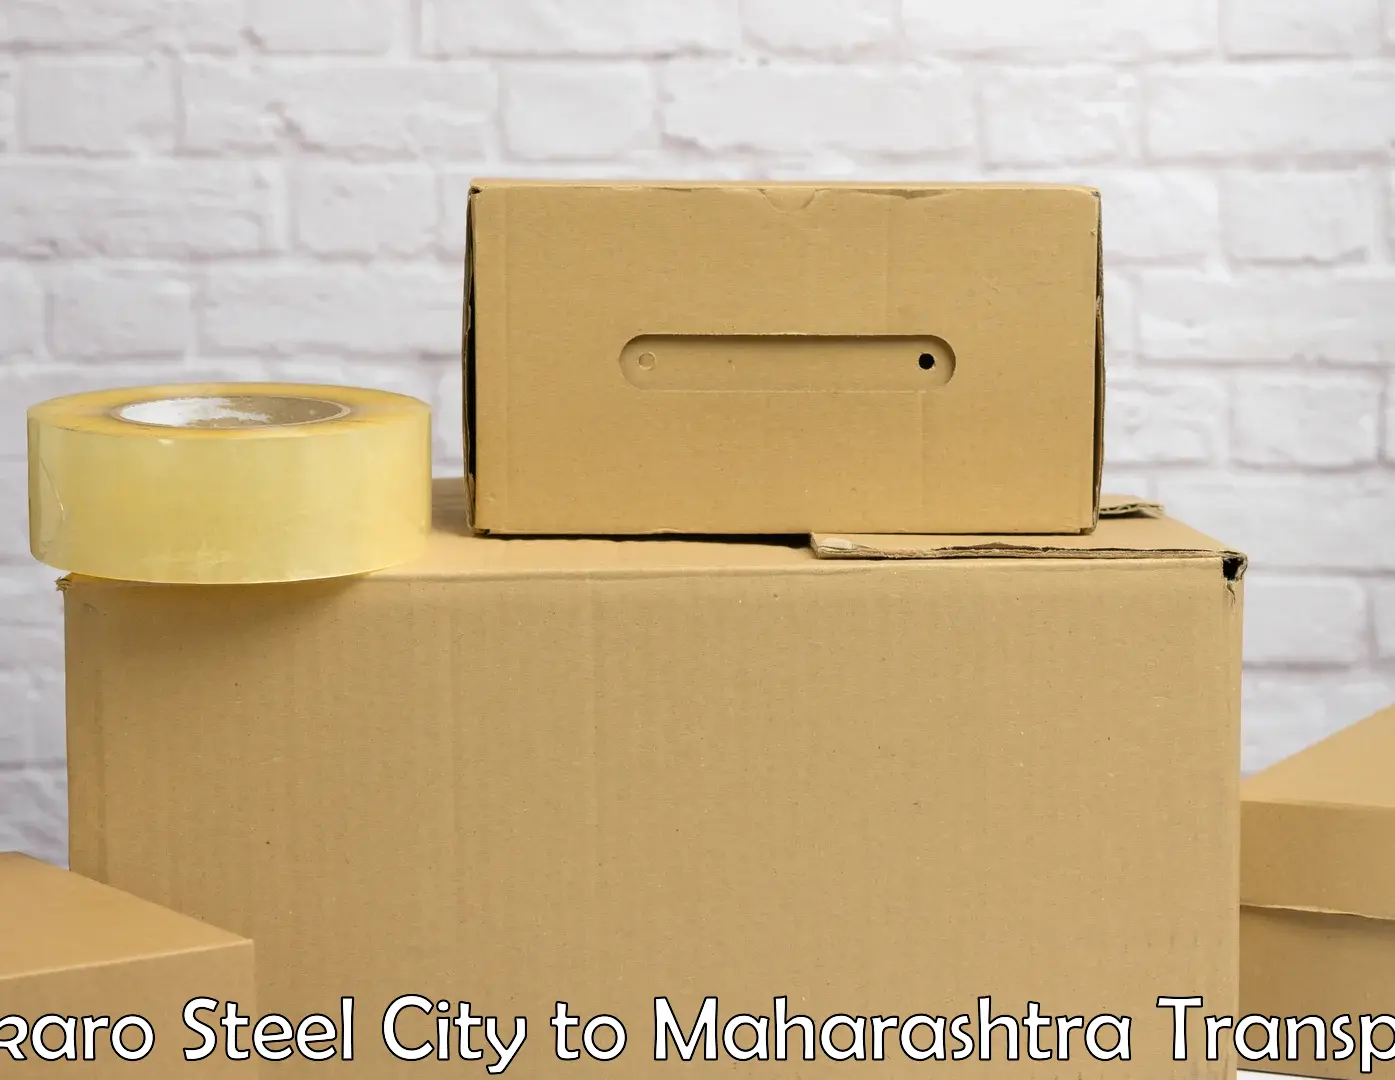 Package delivery services Bokaro Steel City to Sinnar